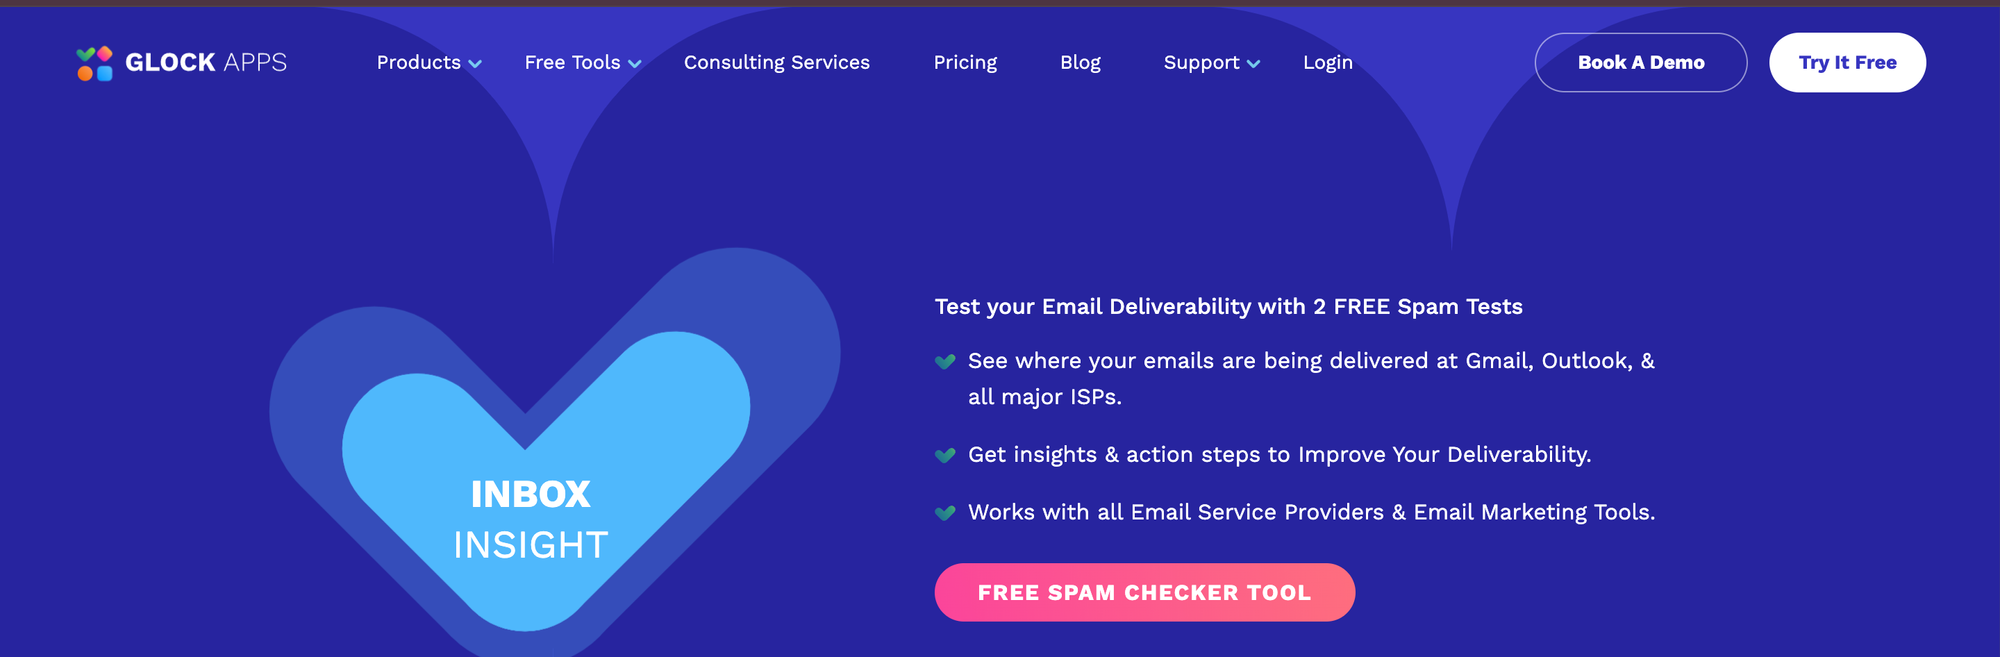 GlockApps - Email Deliverability Tool